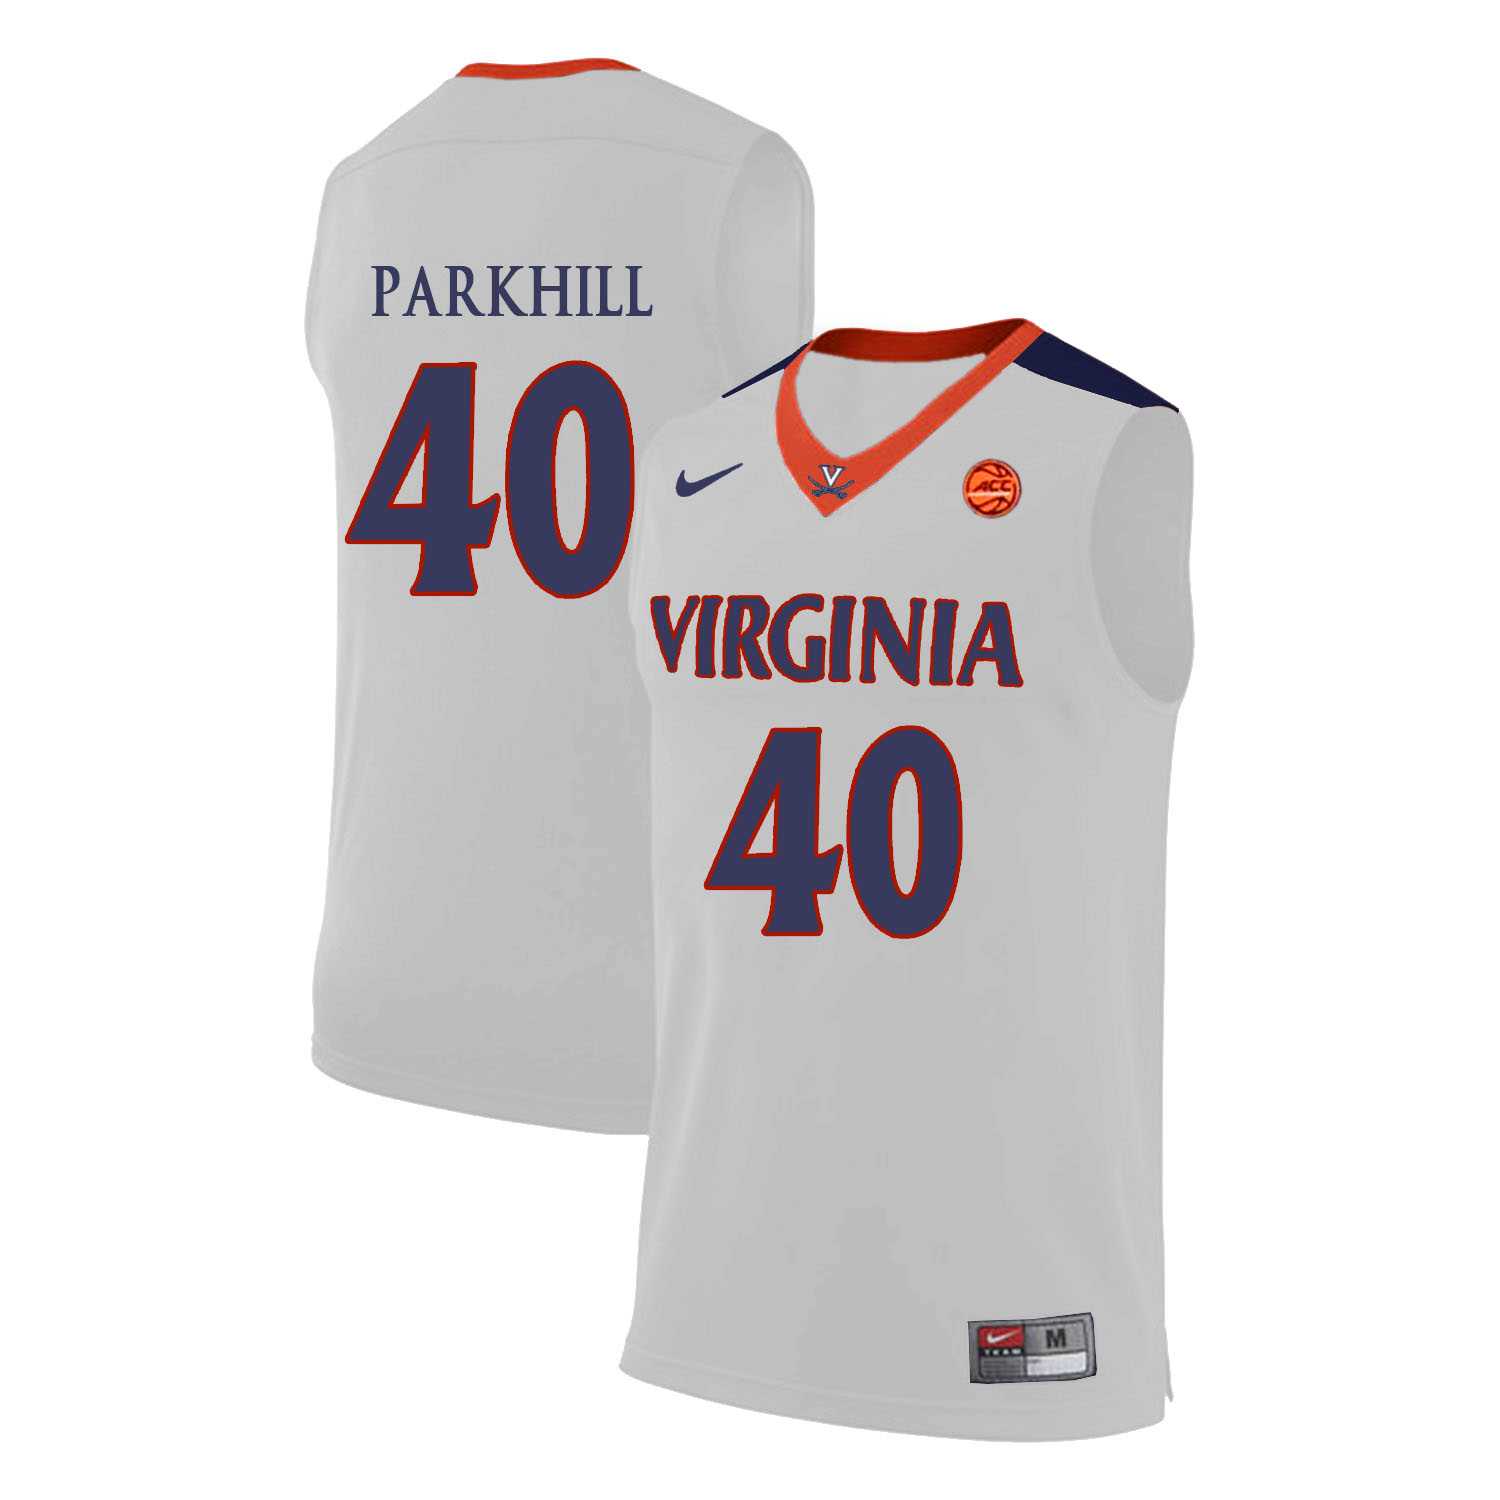 Virginia Cavaliers #40 Barry Parkhill White College Basketball Jersey